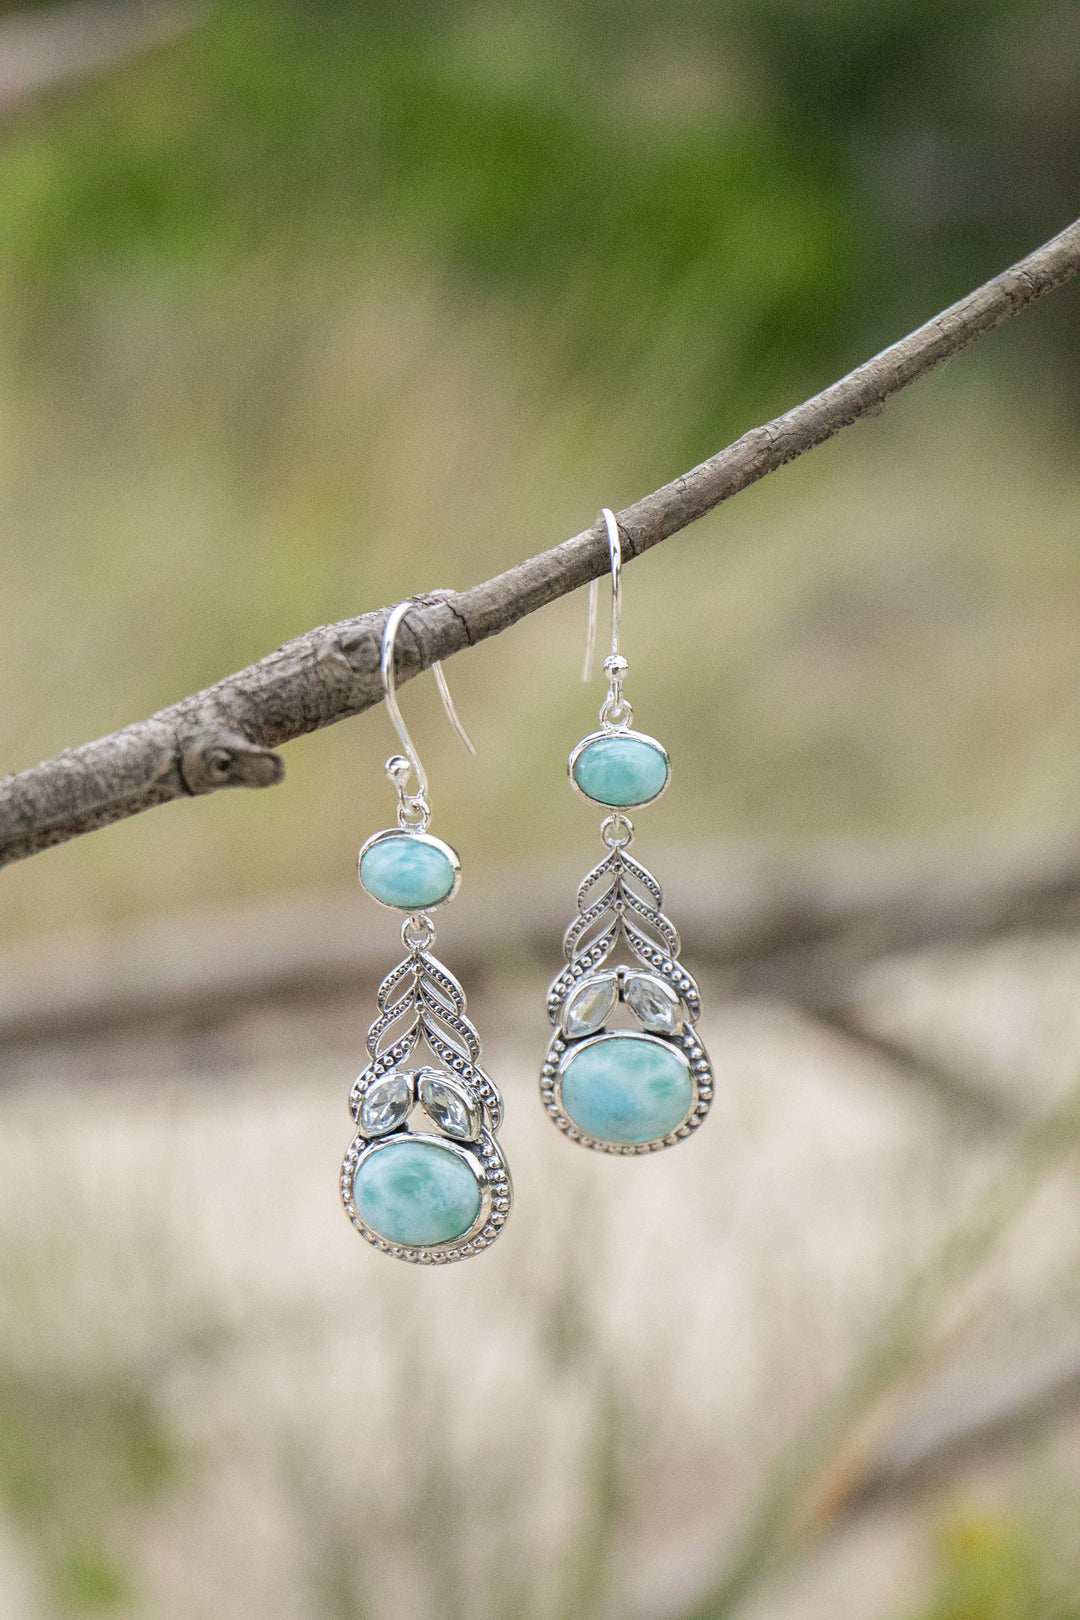 Larimar and Topaz Earrings in Sterling Silver